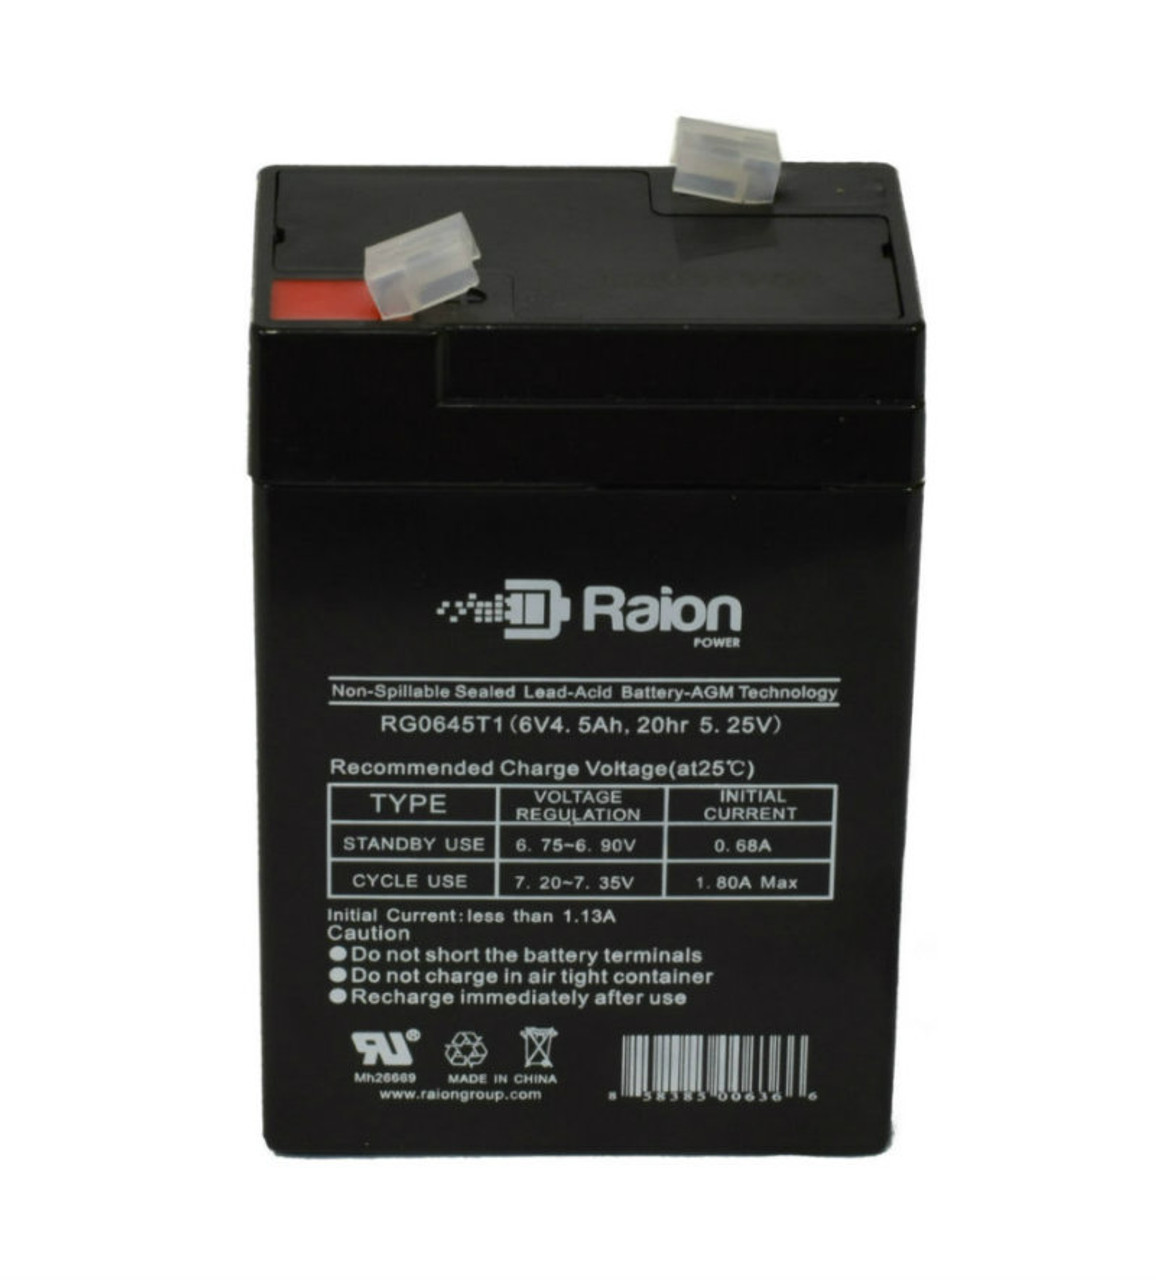 Raion Power RG0645T1 Replacement Battery Cartridge for GS Portalac PE6V4.5F1